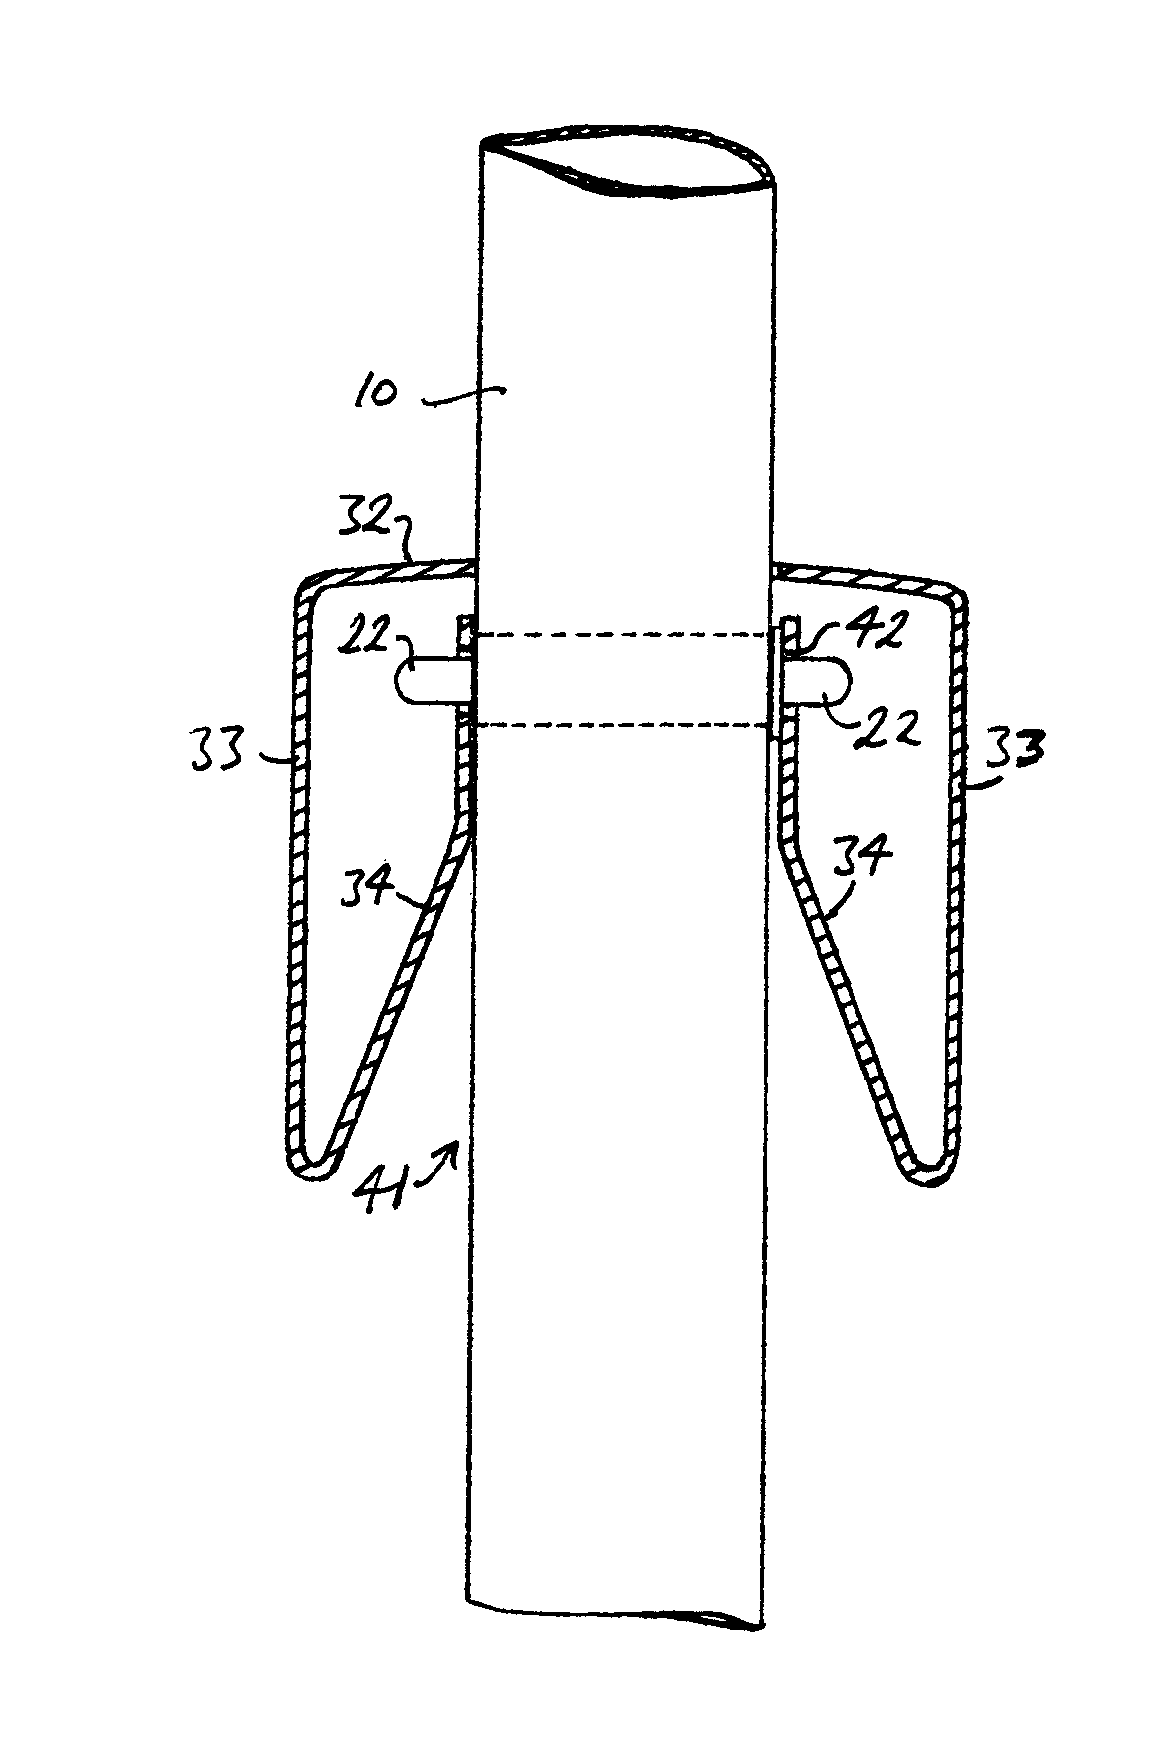 Self-raking fence panel and rail, kit of parts, and method of assembly and installation